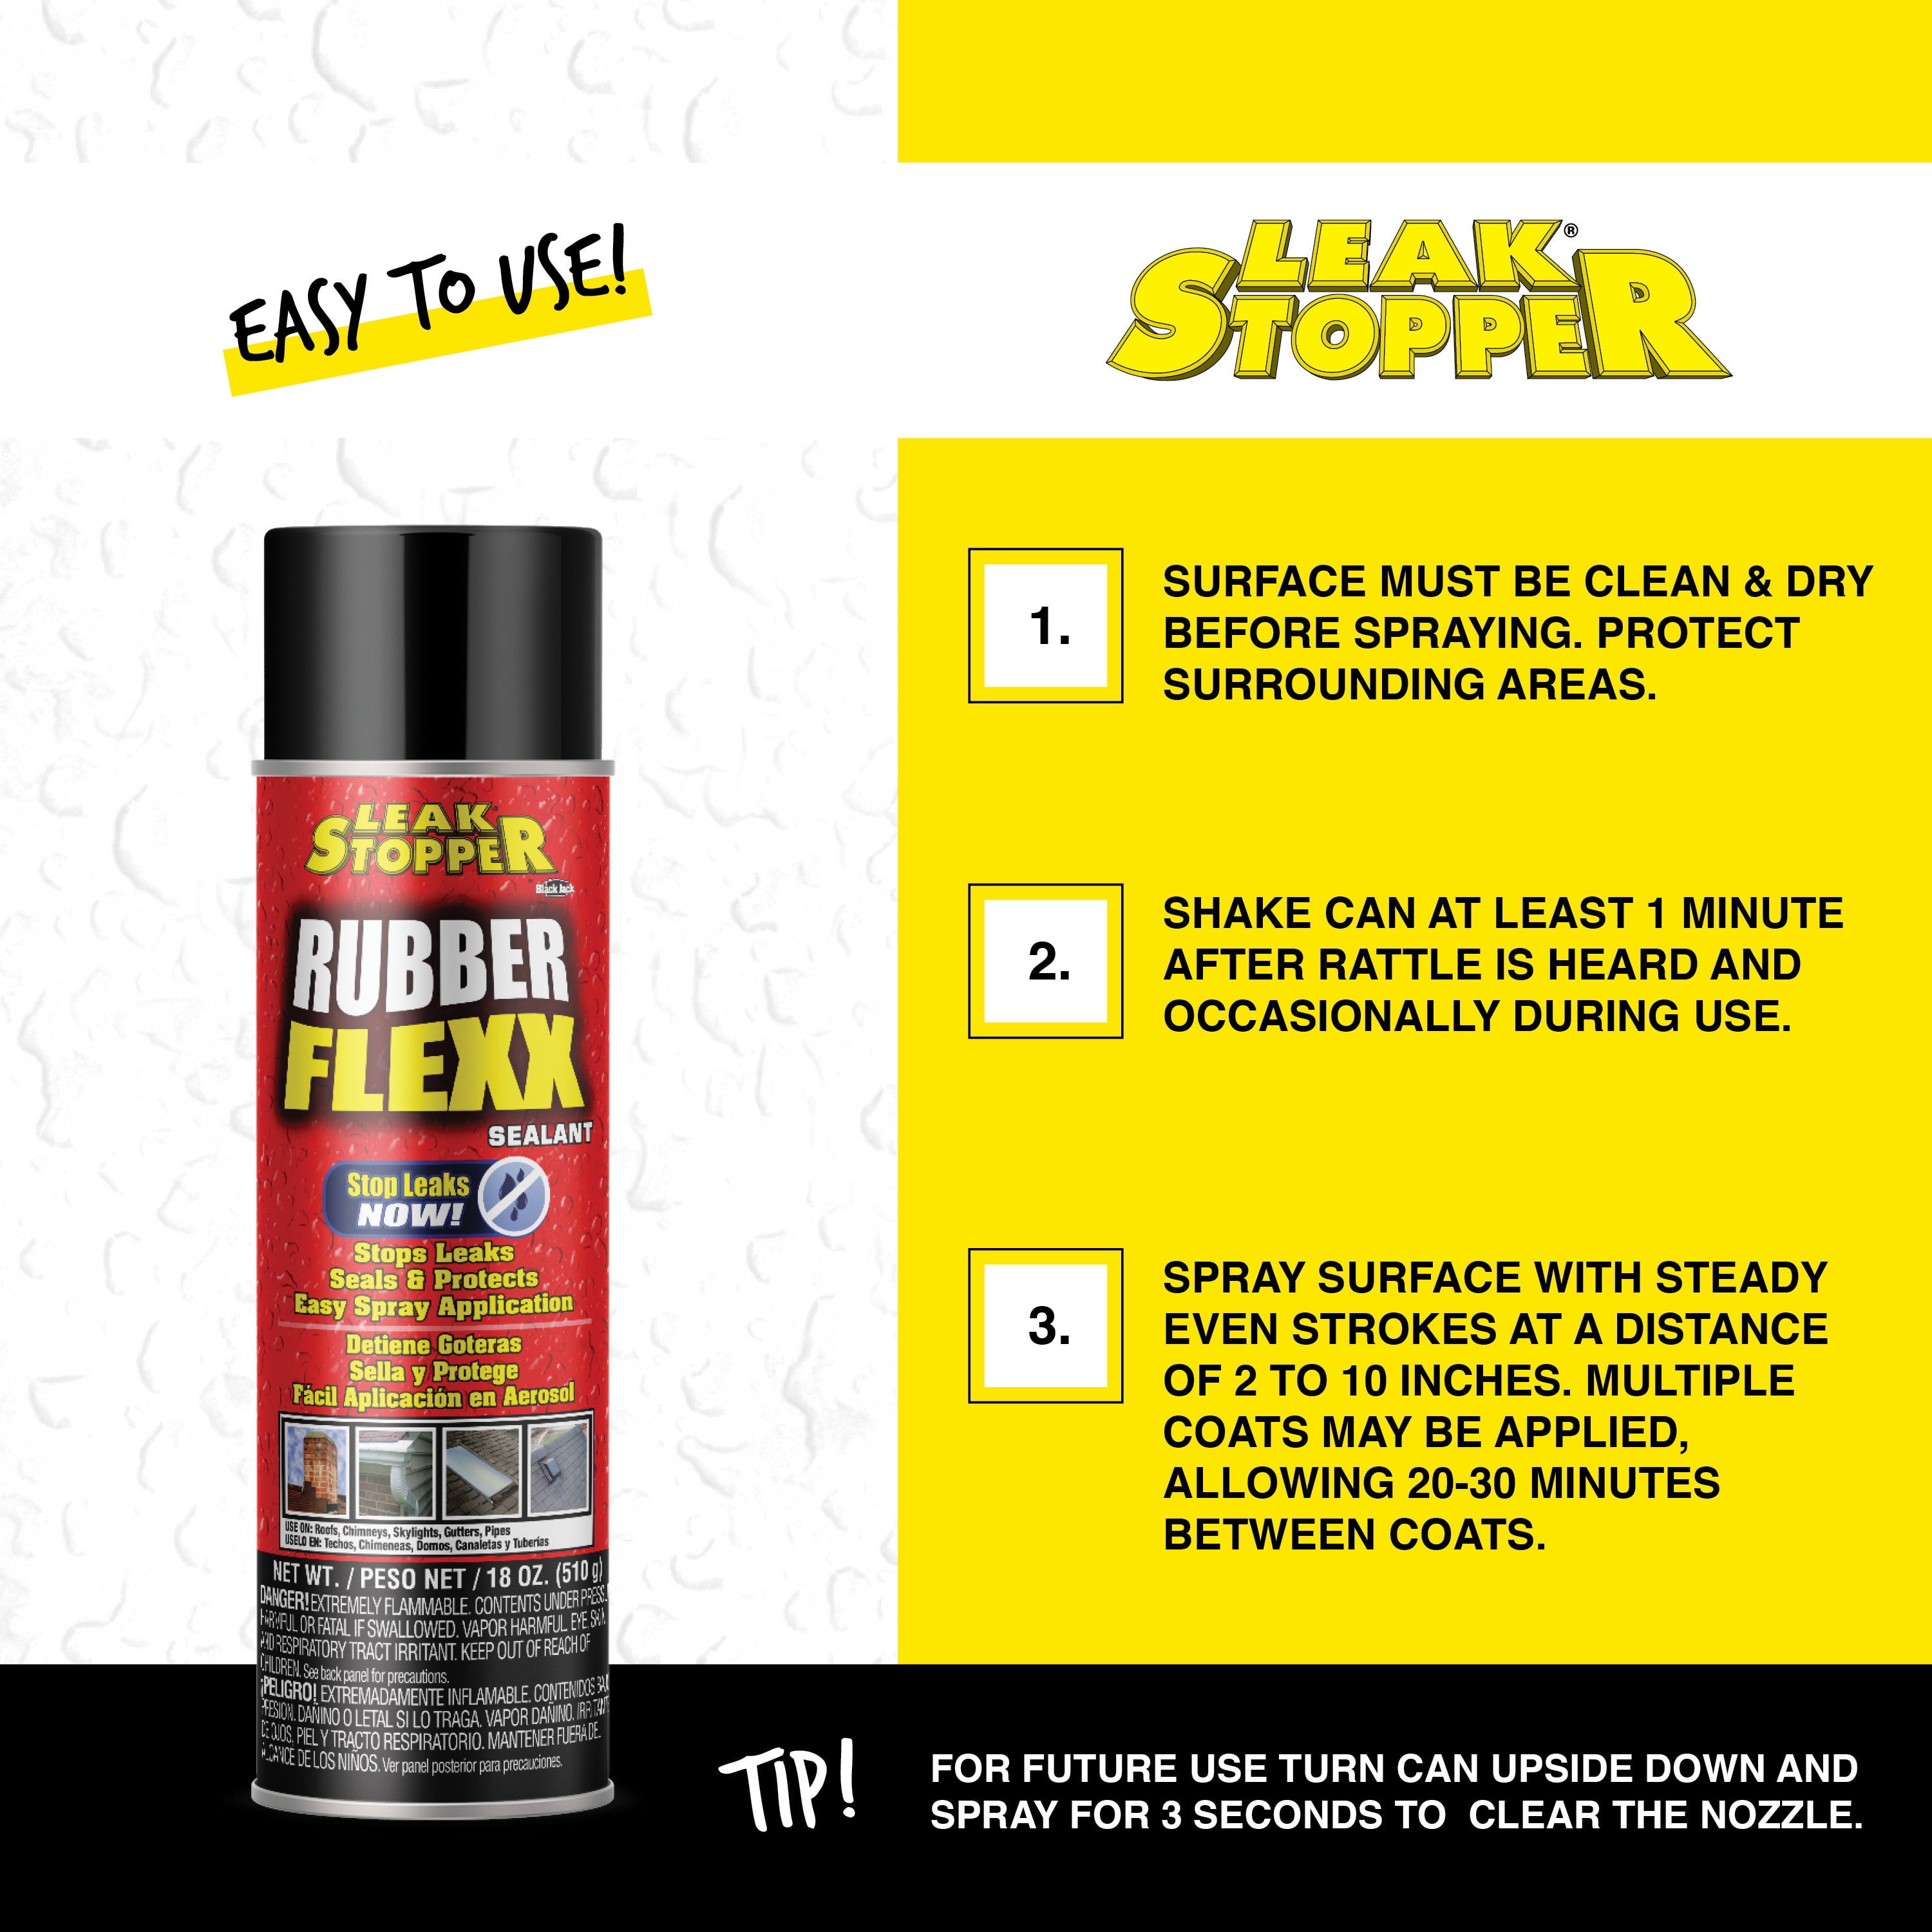  Leak Stopper Rubber Flexx Leak Repair & Sealant Spray 18 Oz, Just Point & Spray for Making basic repairs on wood, asphalt roofing, metal  and masonry surfaces